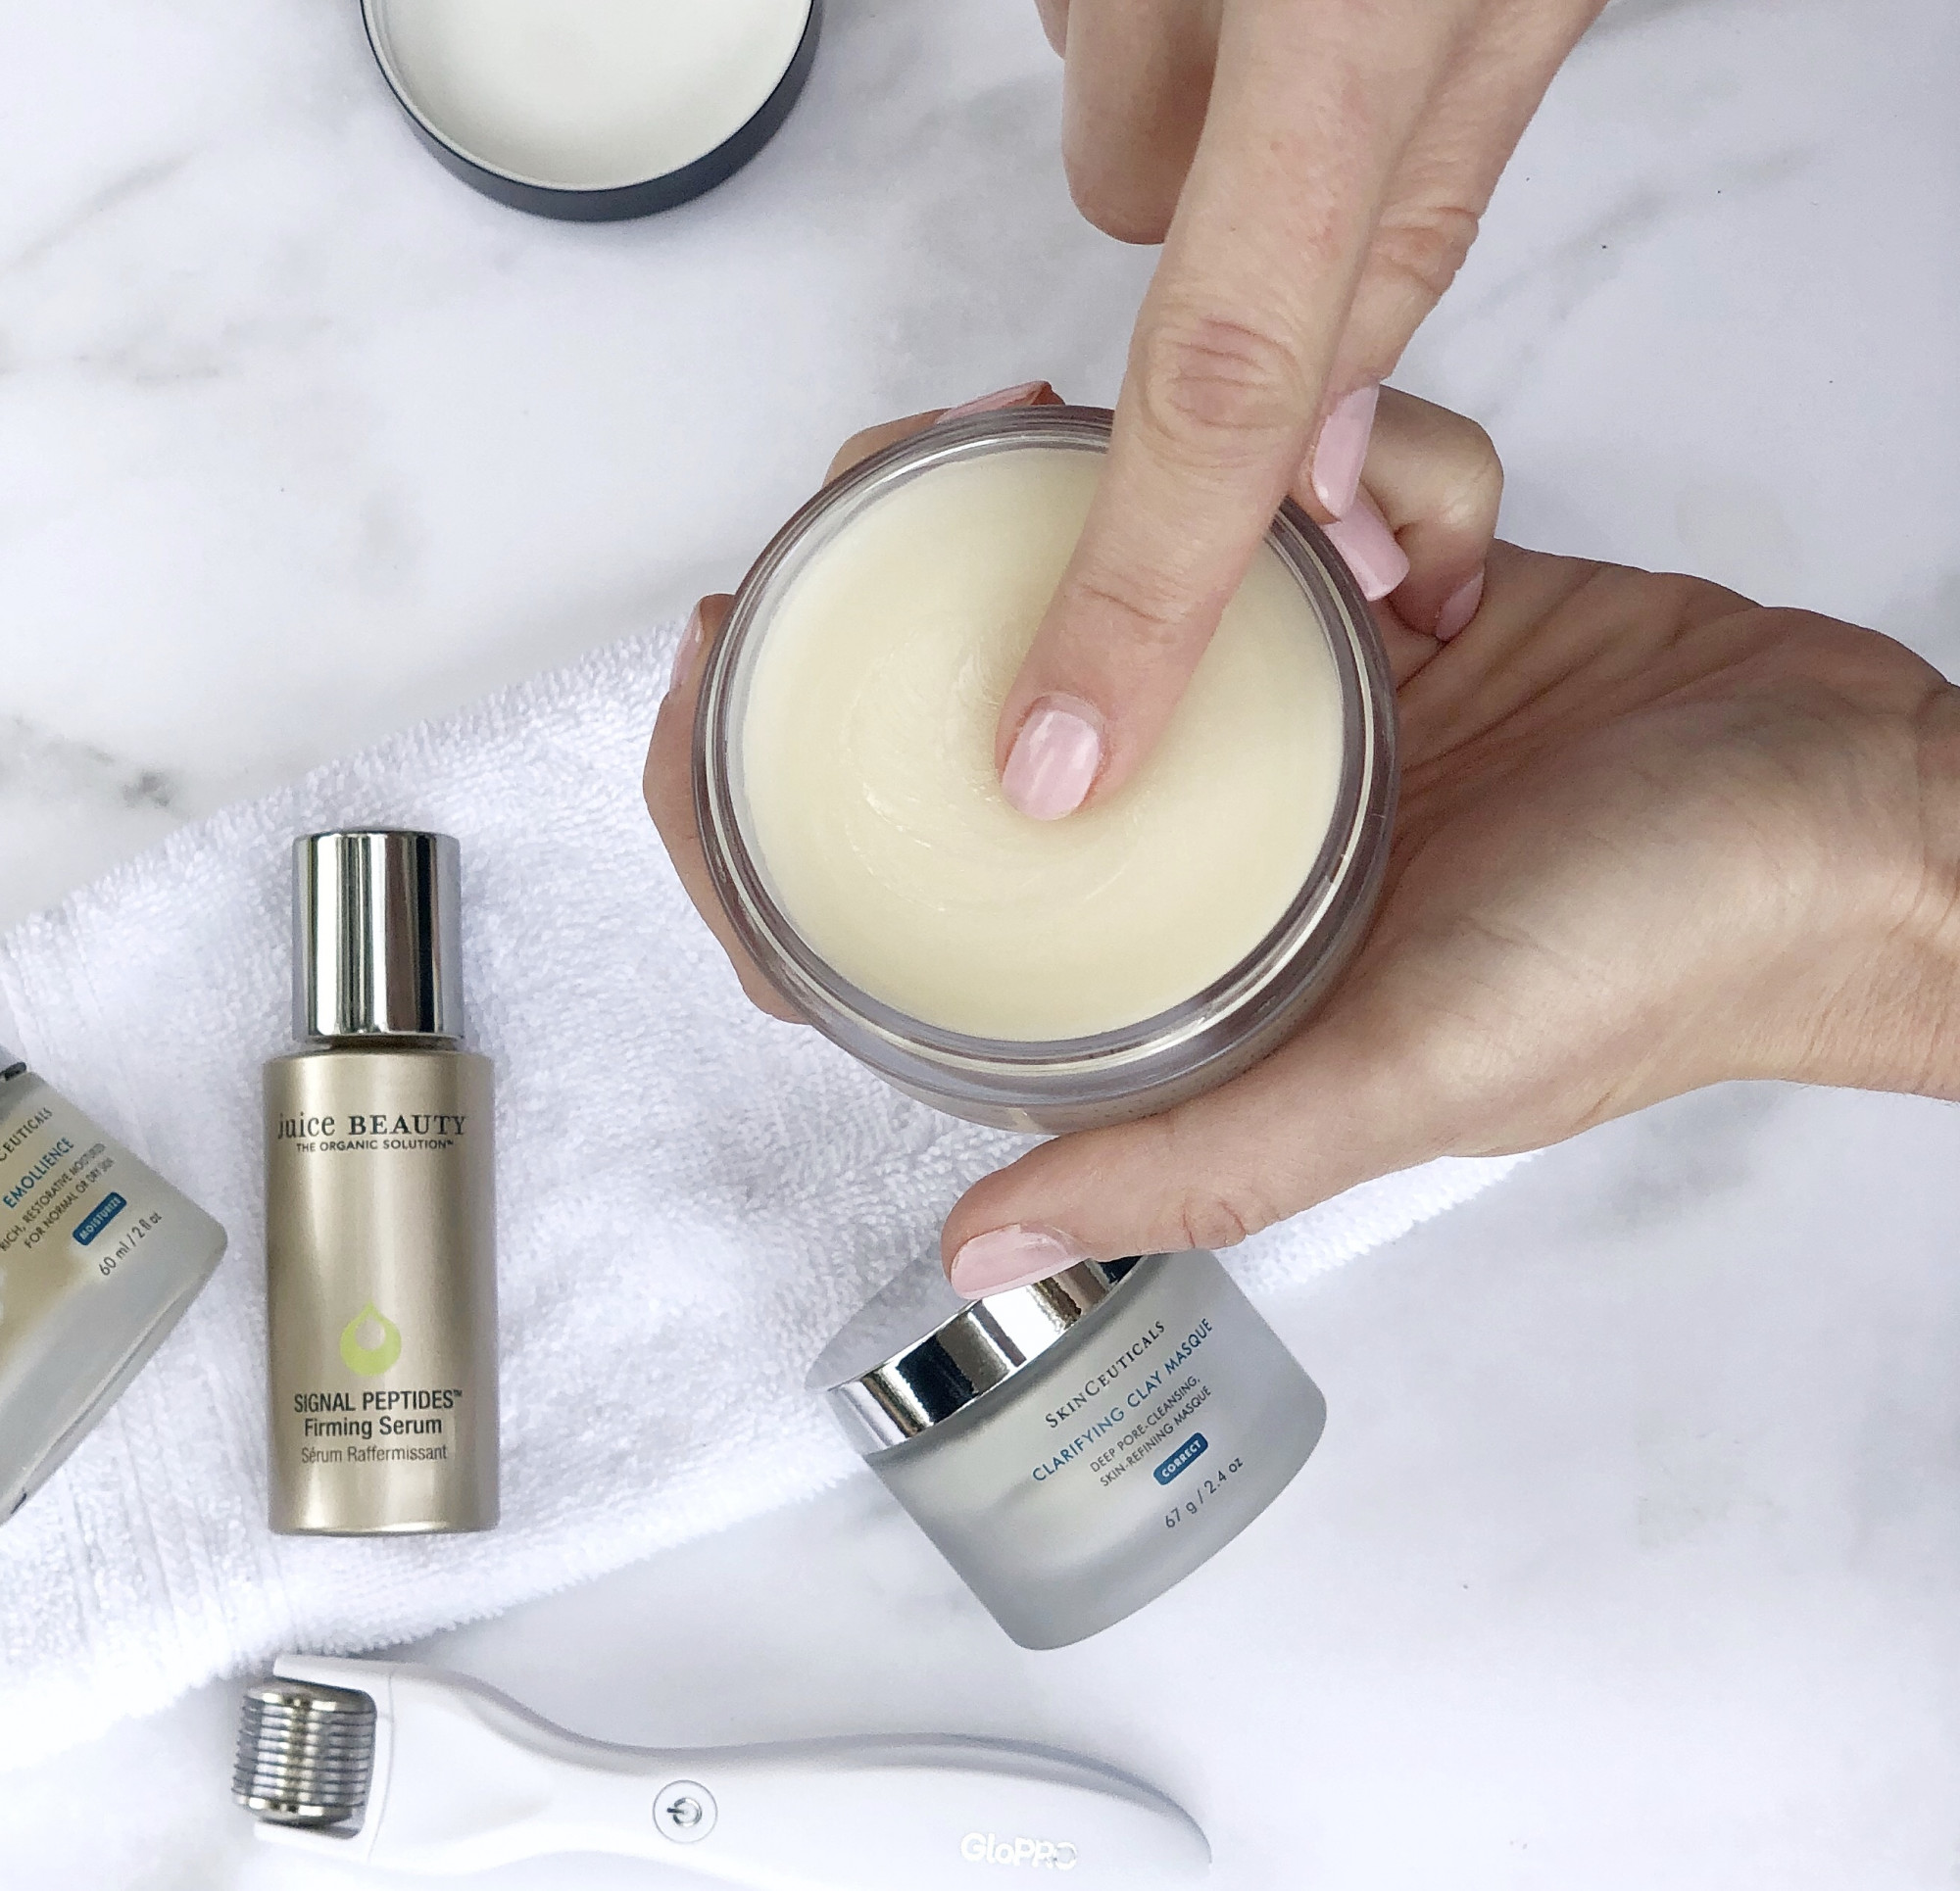 beautycounter's cleansing balm